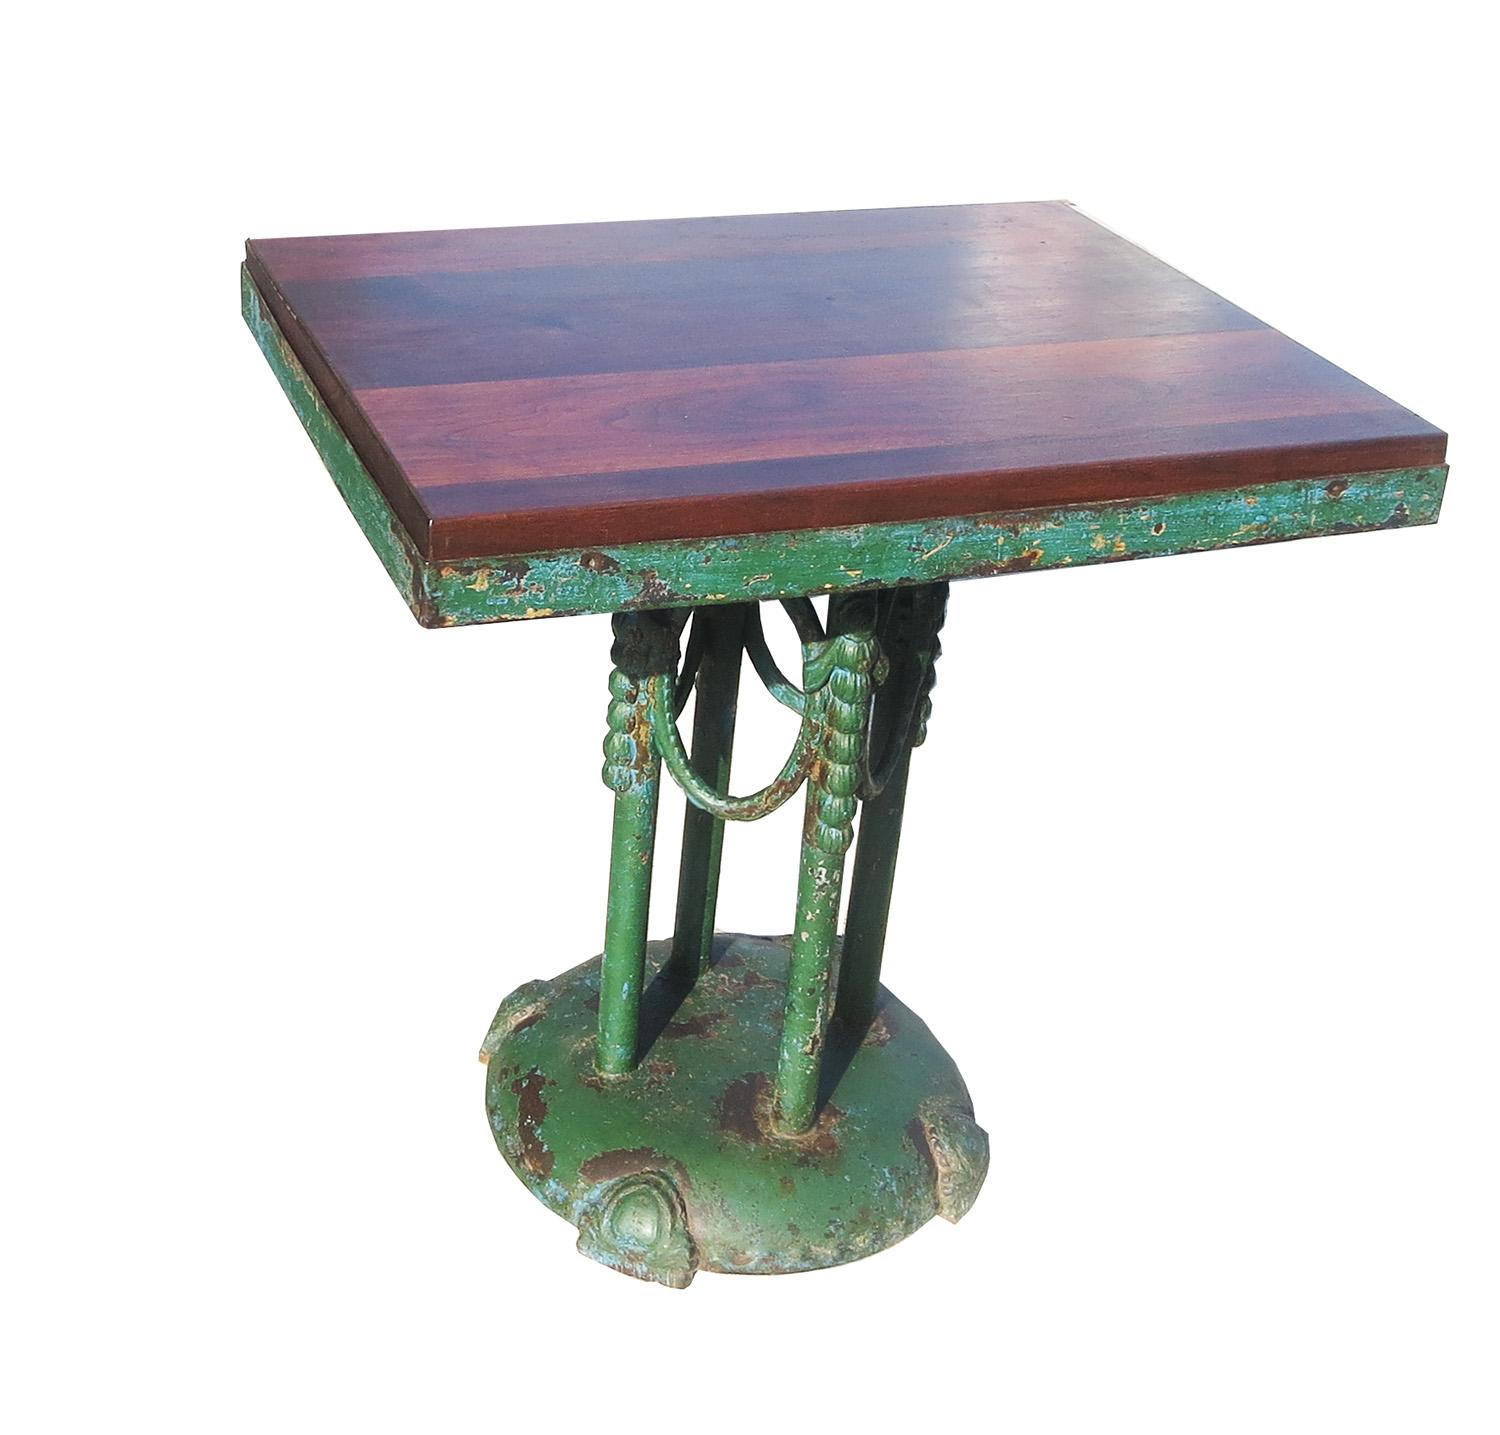 Rustic Painted Iron Cafe Table